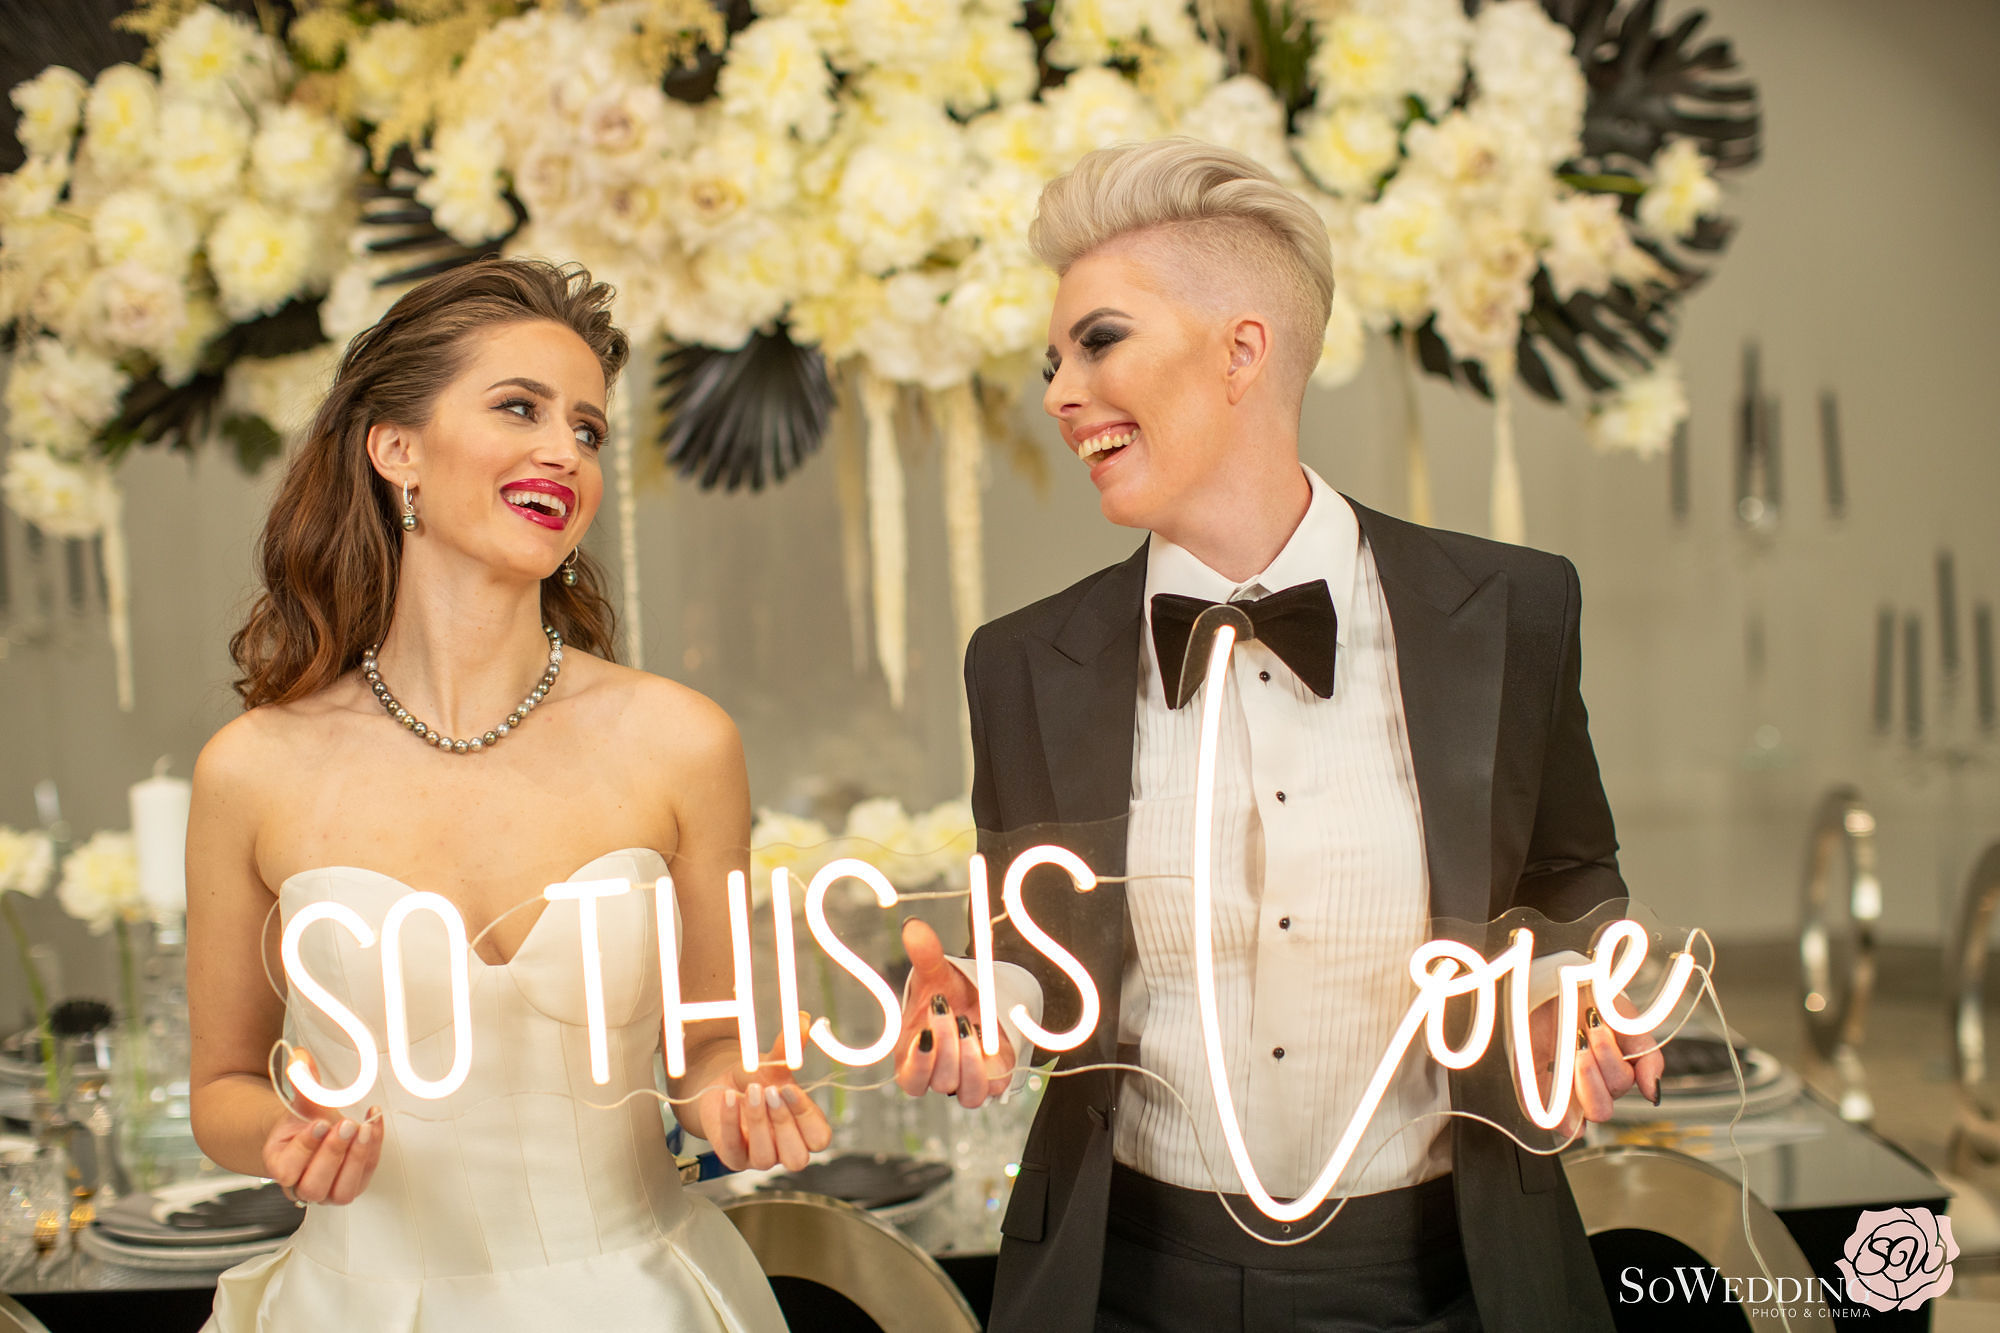 WedLuxe Style File: New York I Love You ~ "So This is Love"